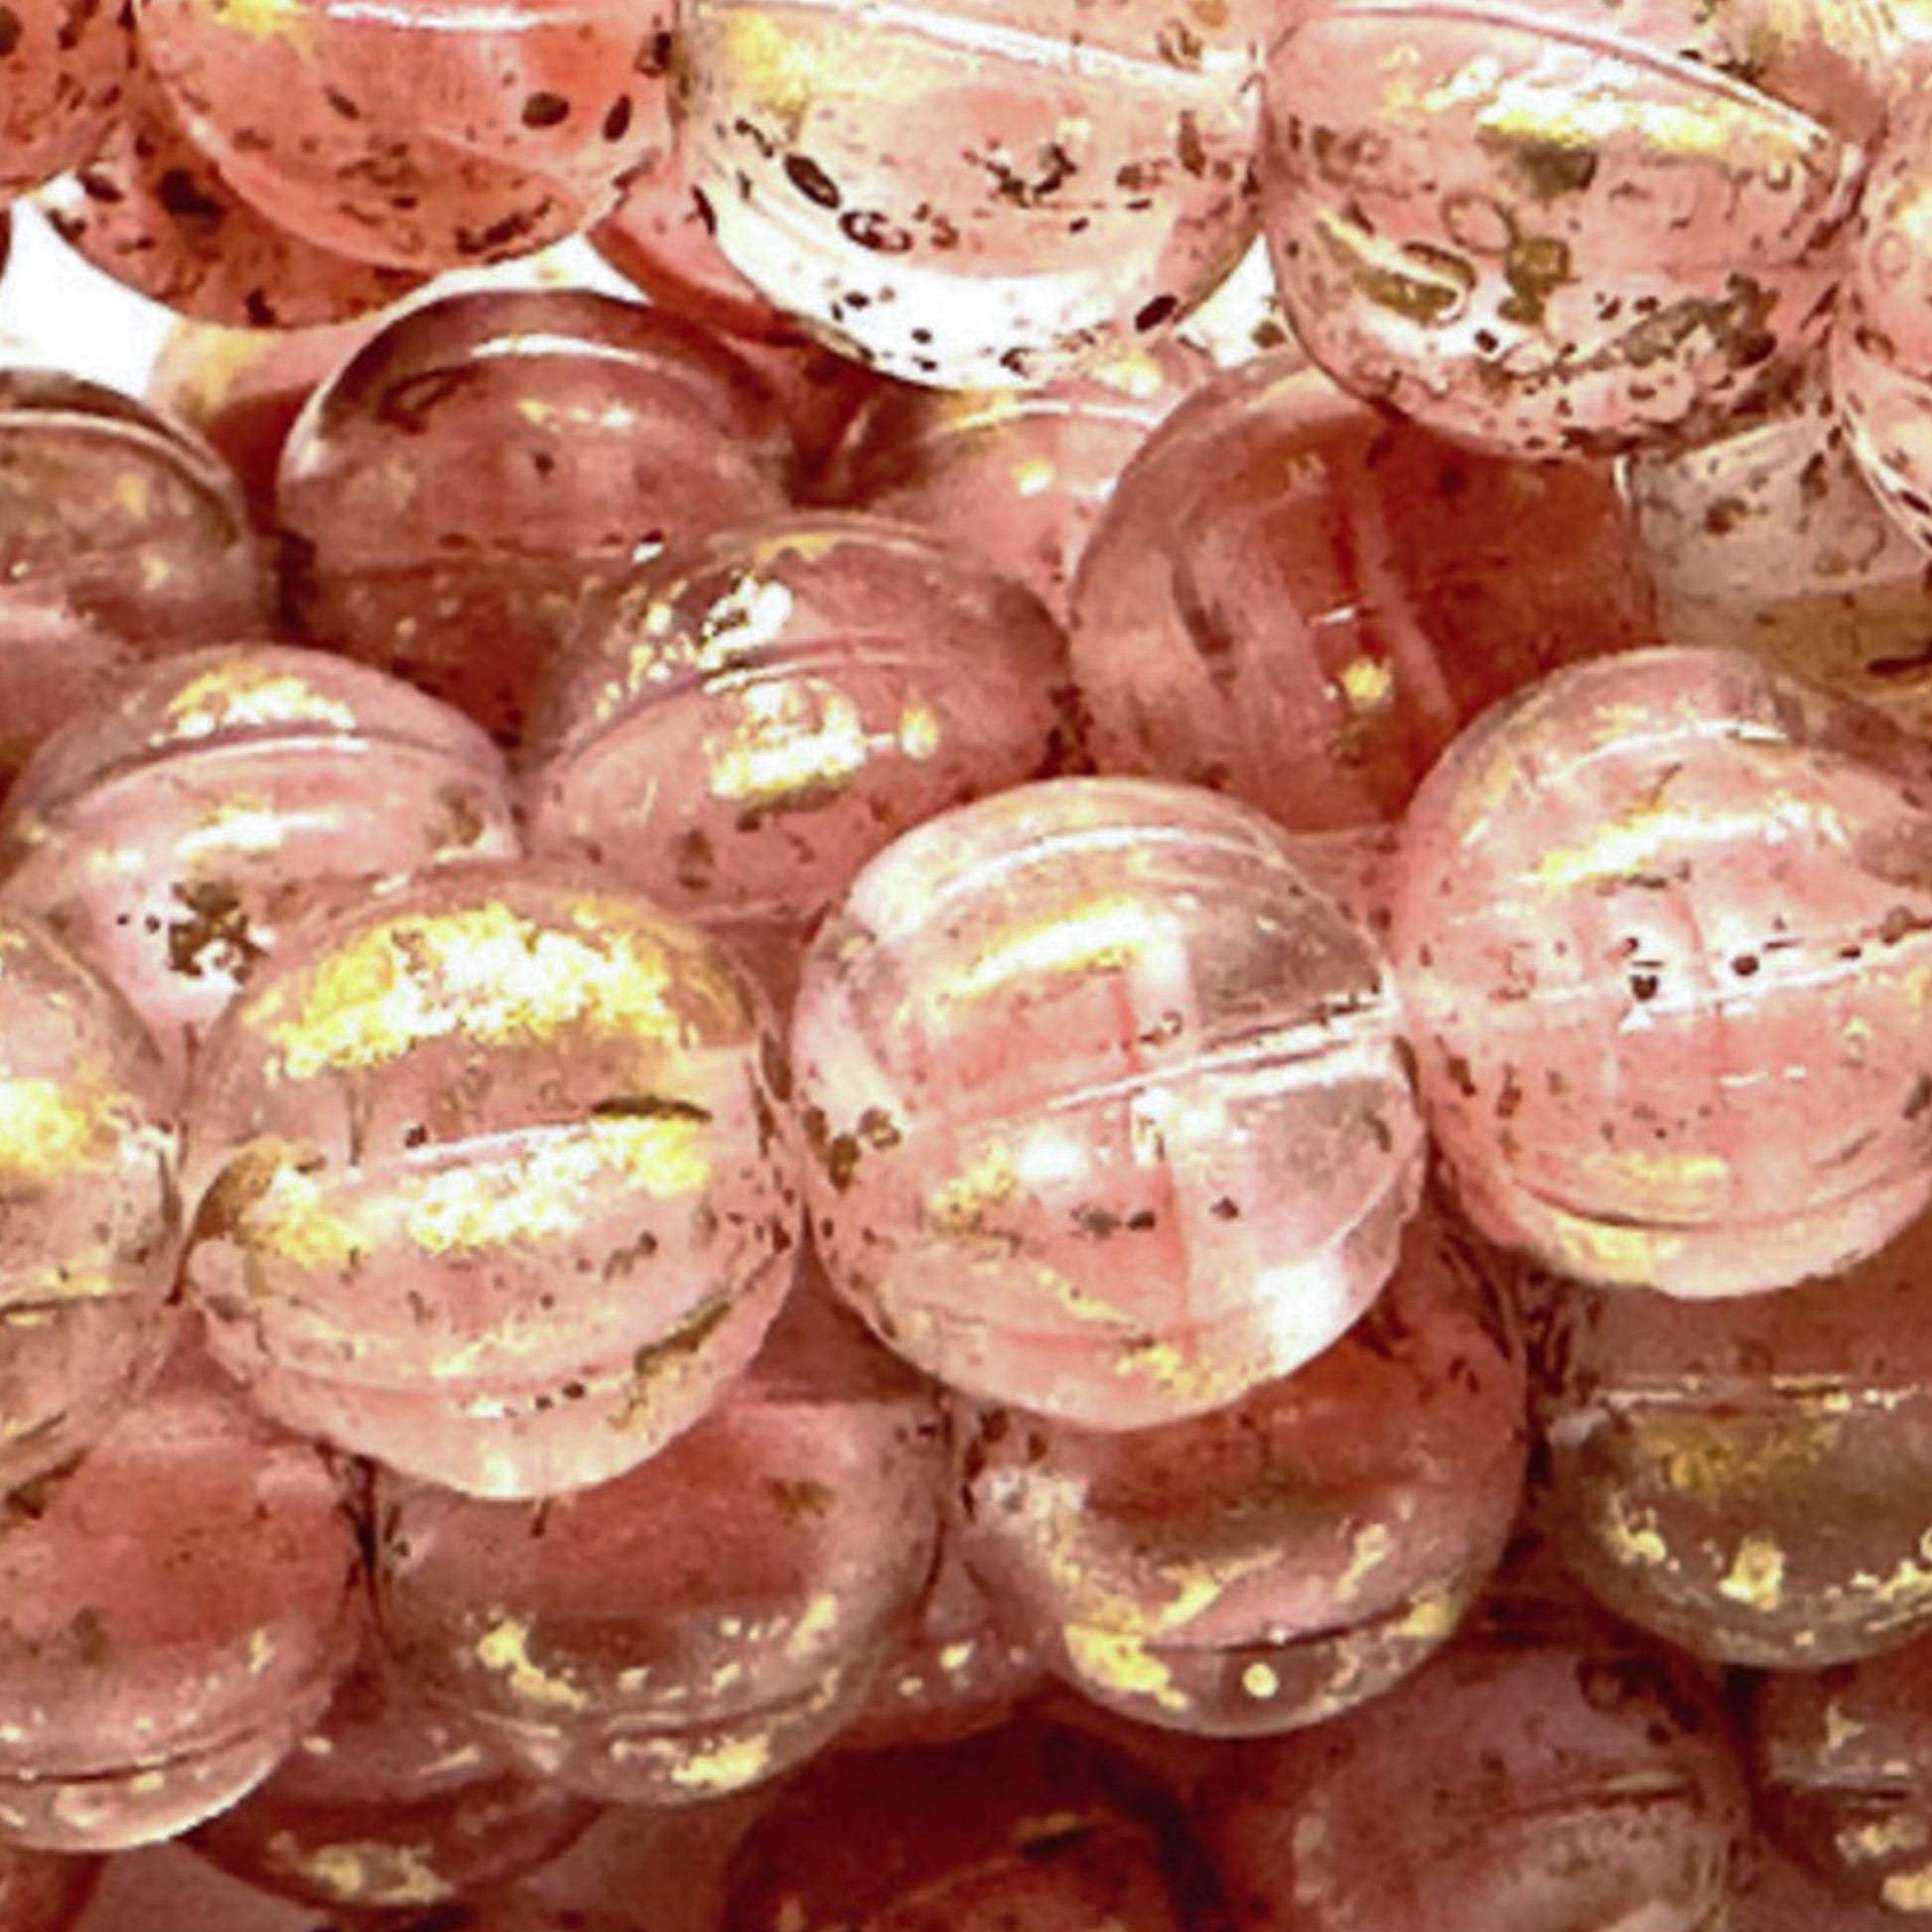 Melon Semi-Transparent Crystal and Pink with Gold Splash 8mm Glass Bead - 16 pcs.-The Bead Gallery Honolulu